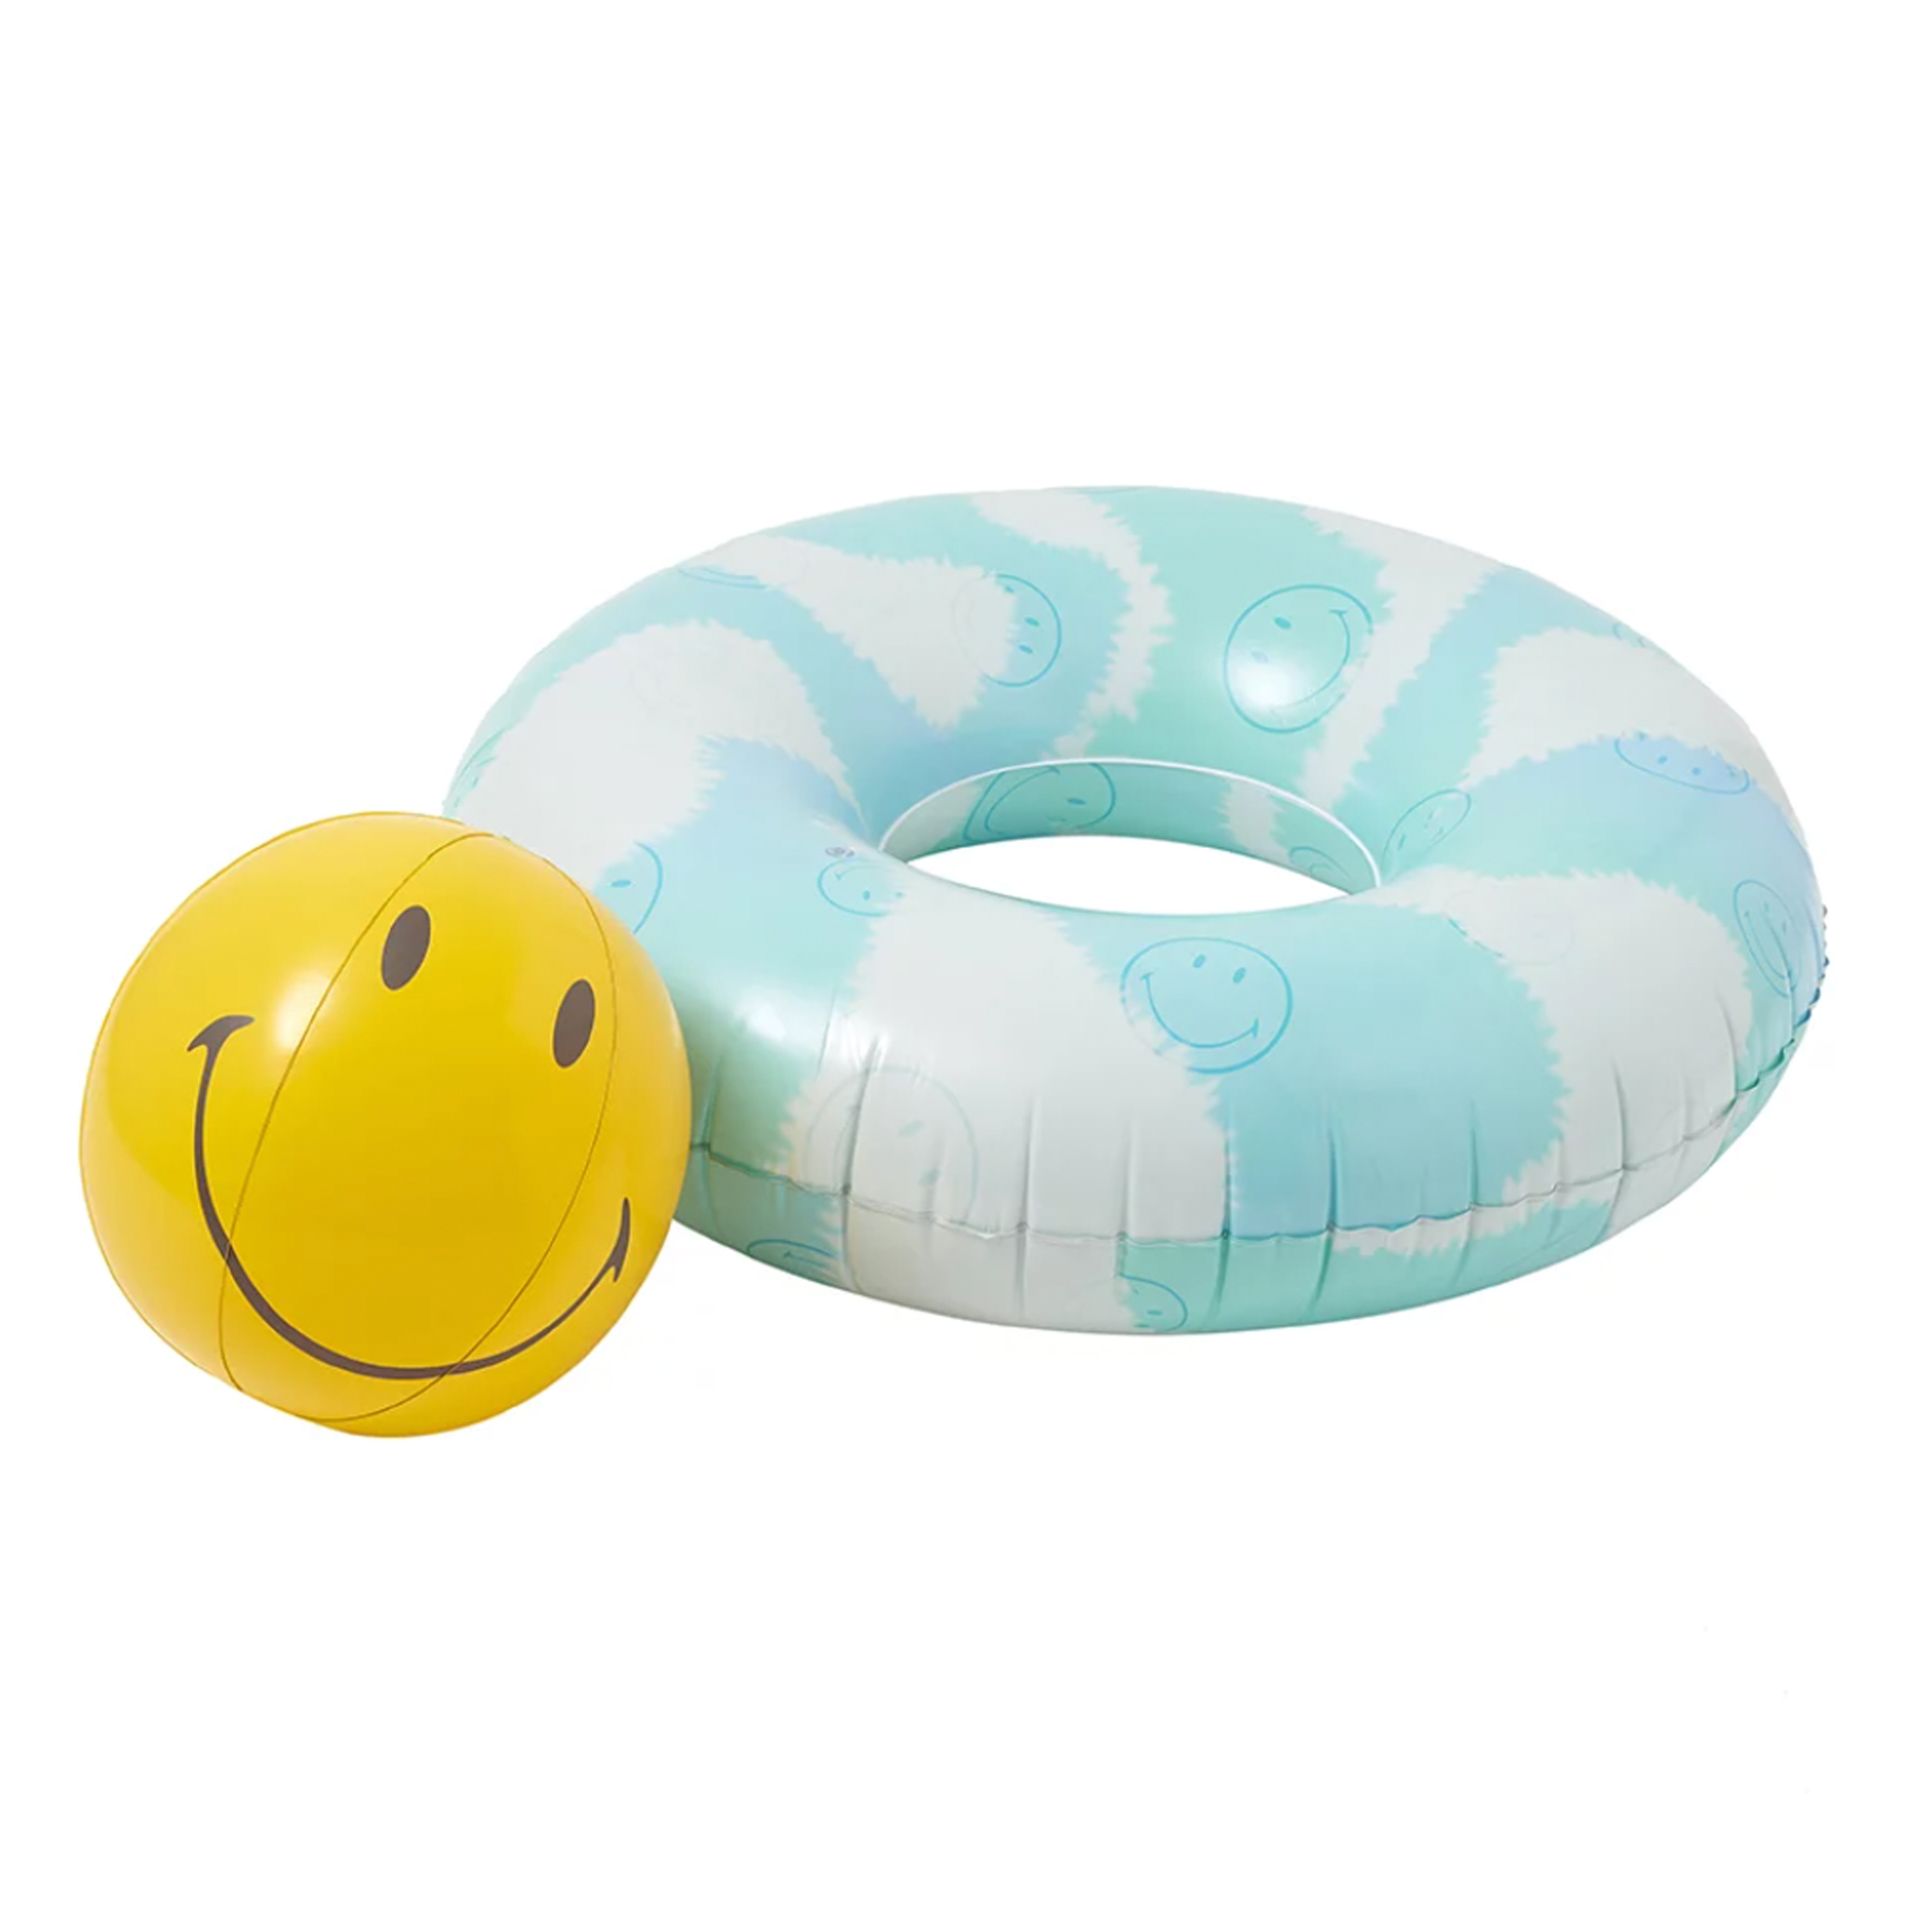 Sunnylife Limited Edition Smiley Pool Ring & Ball